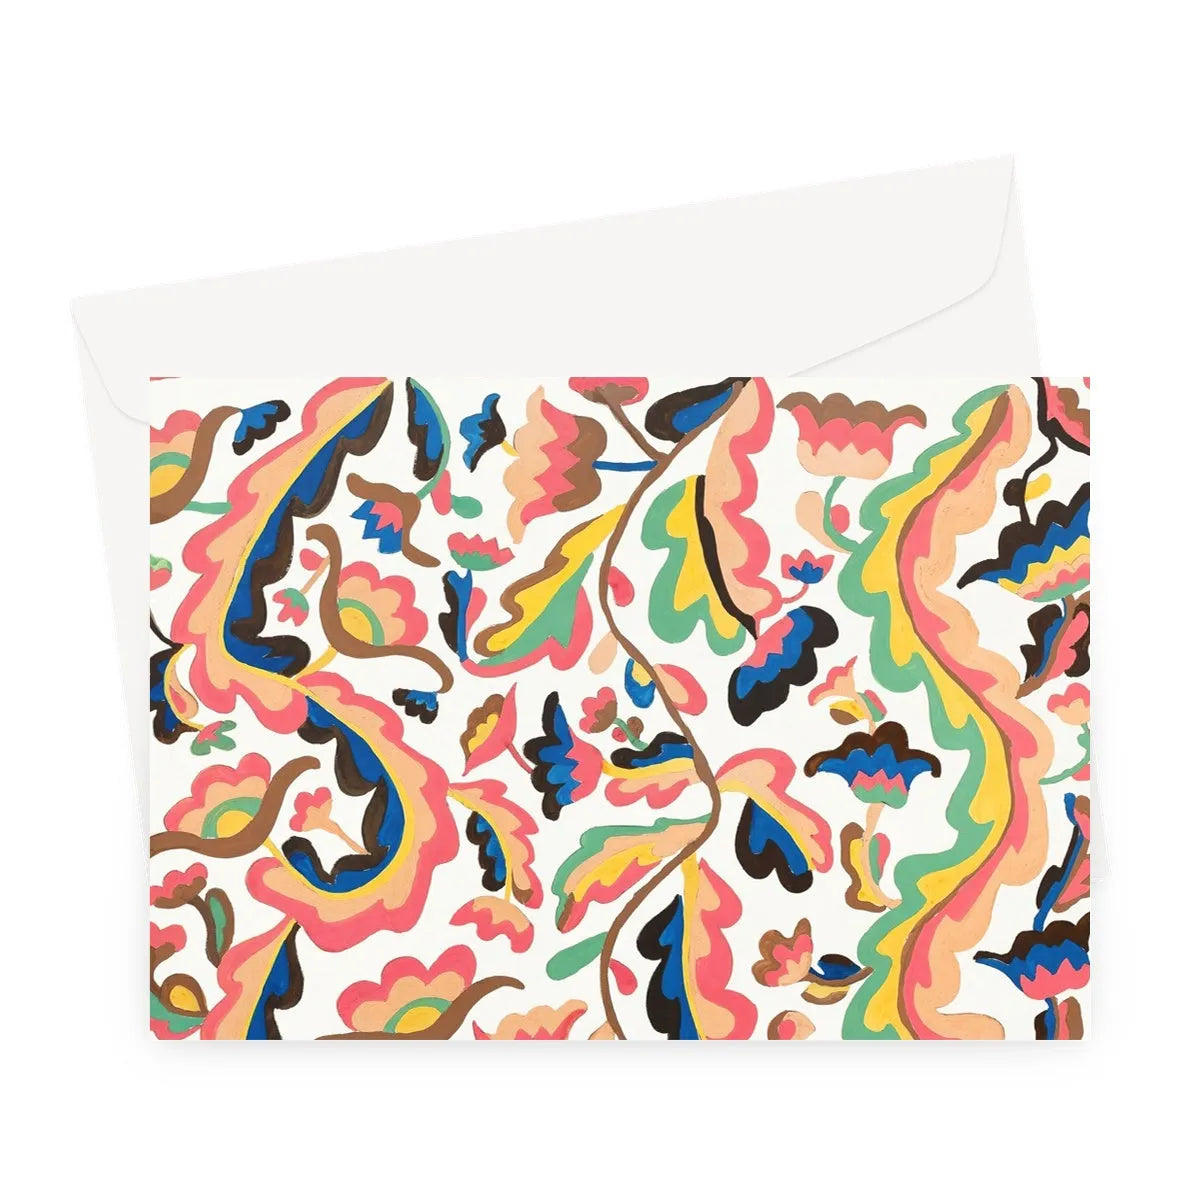 Colcha By Etna Wiswall Greeting Card - A5 Landscape / 1 Card - Greeting & Note Cards - Aesthetic Art